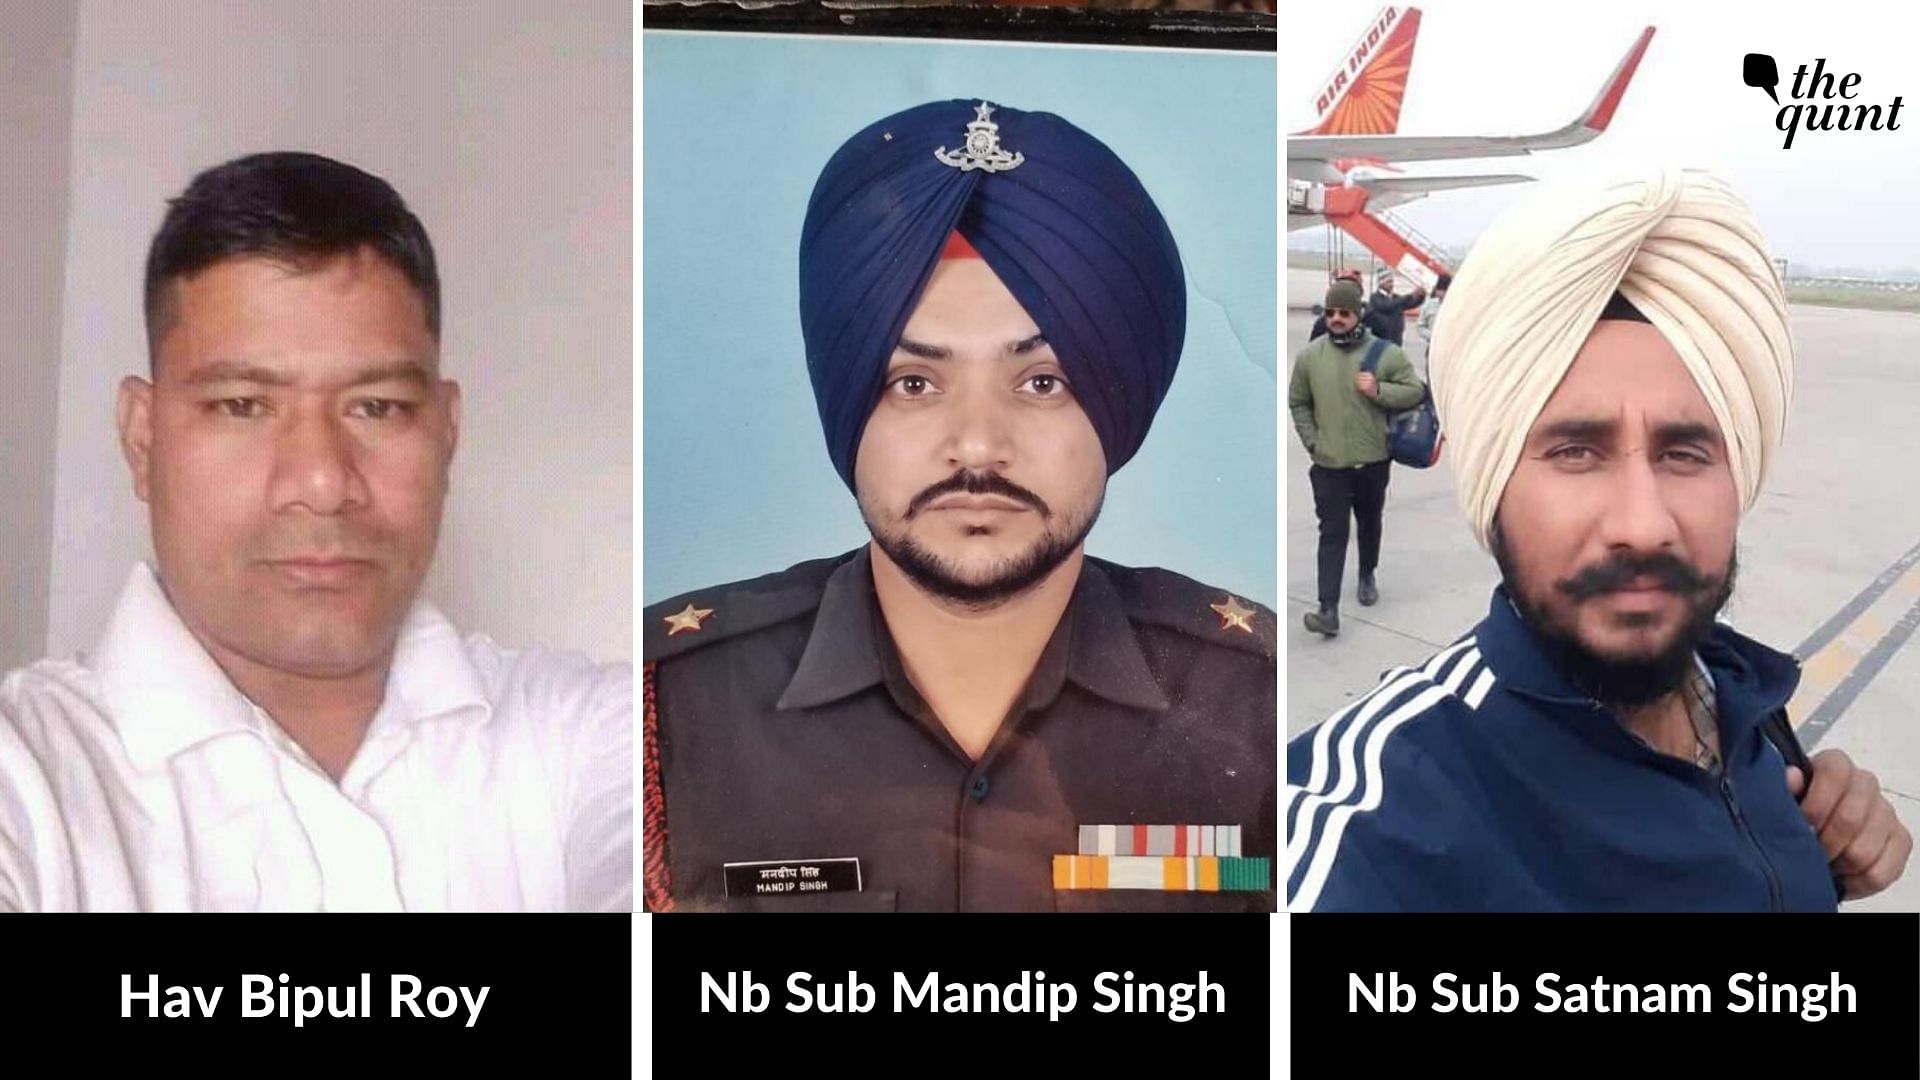 The Indian Army on Wednesday, 17 June, released a list of names of jawans who lost their lives in the clash in Ladakh’s Galwan with the Chinese PLA on Monday.